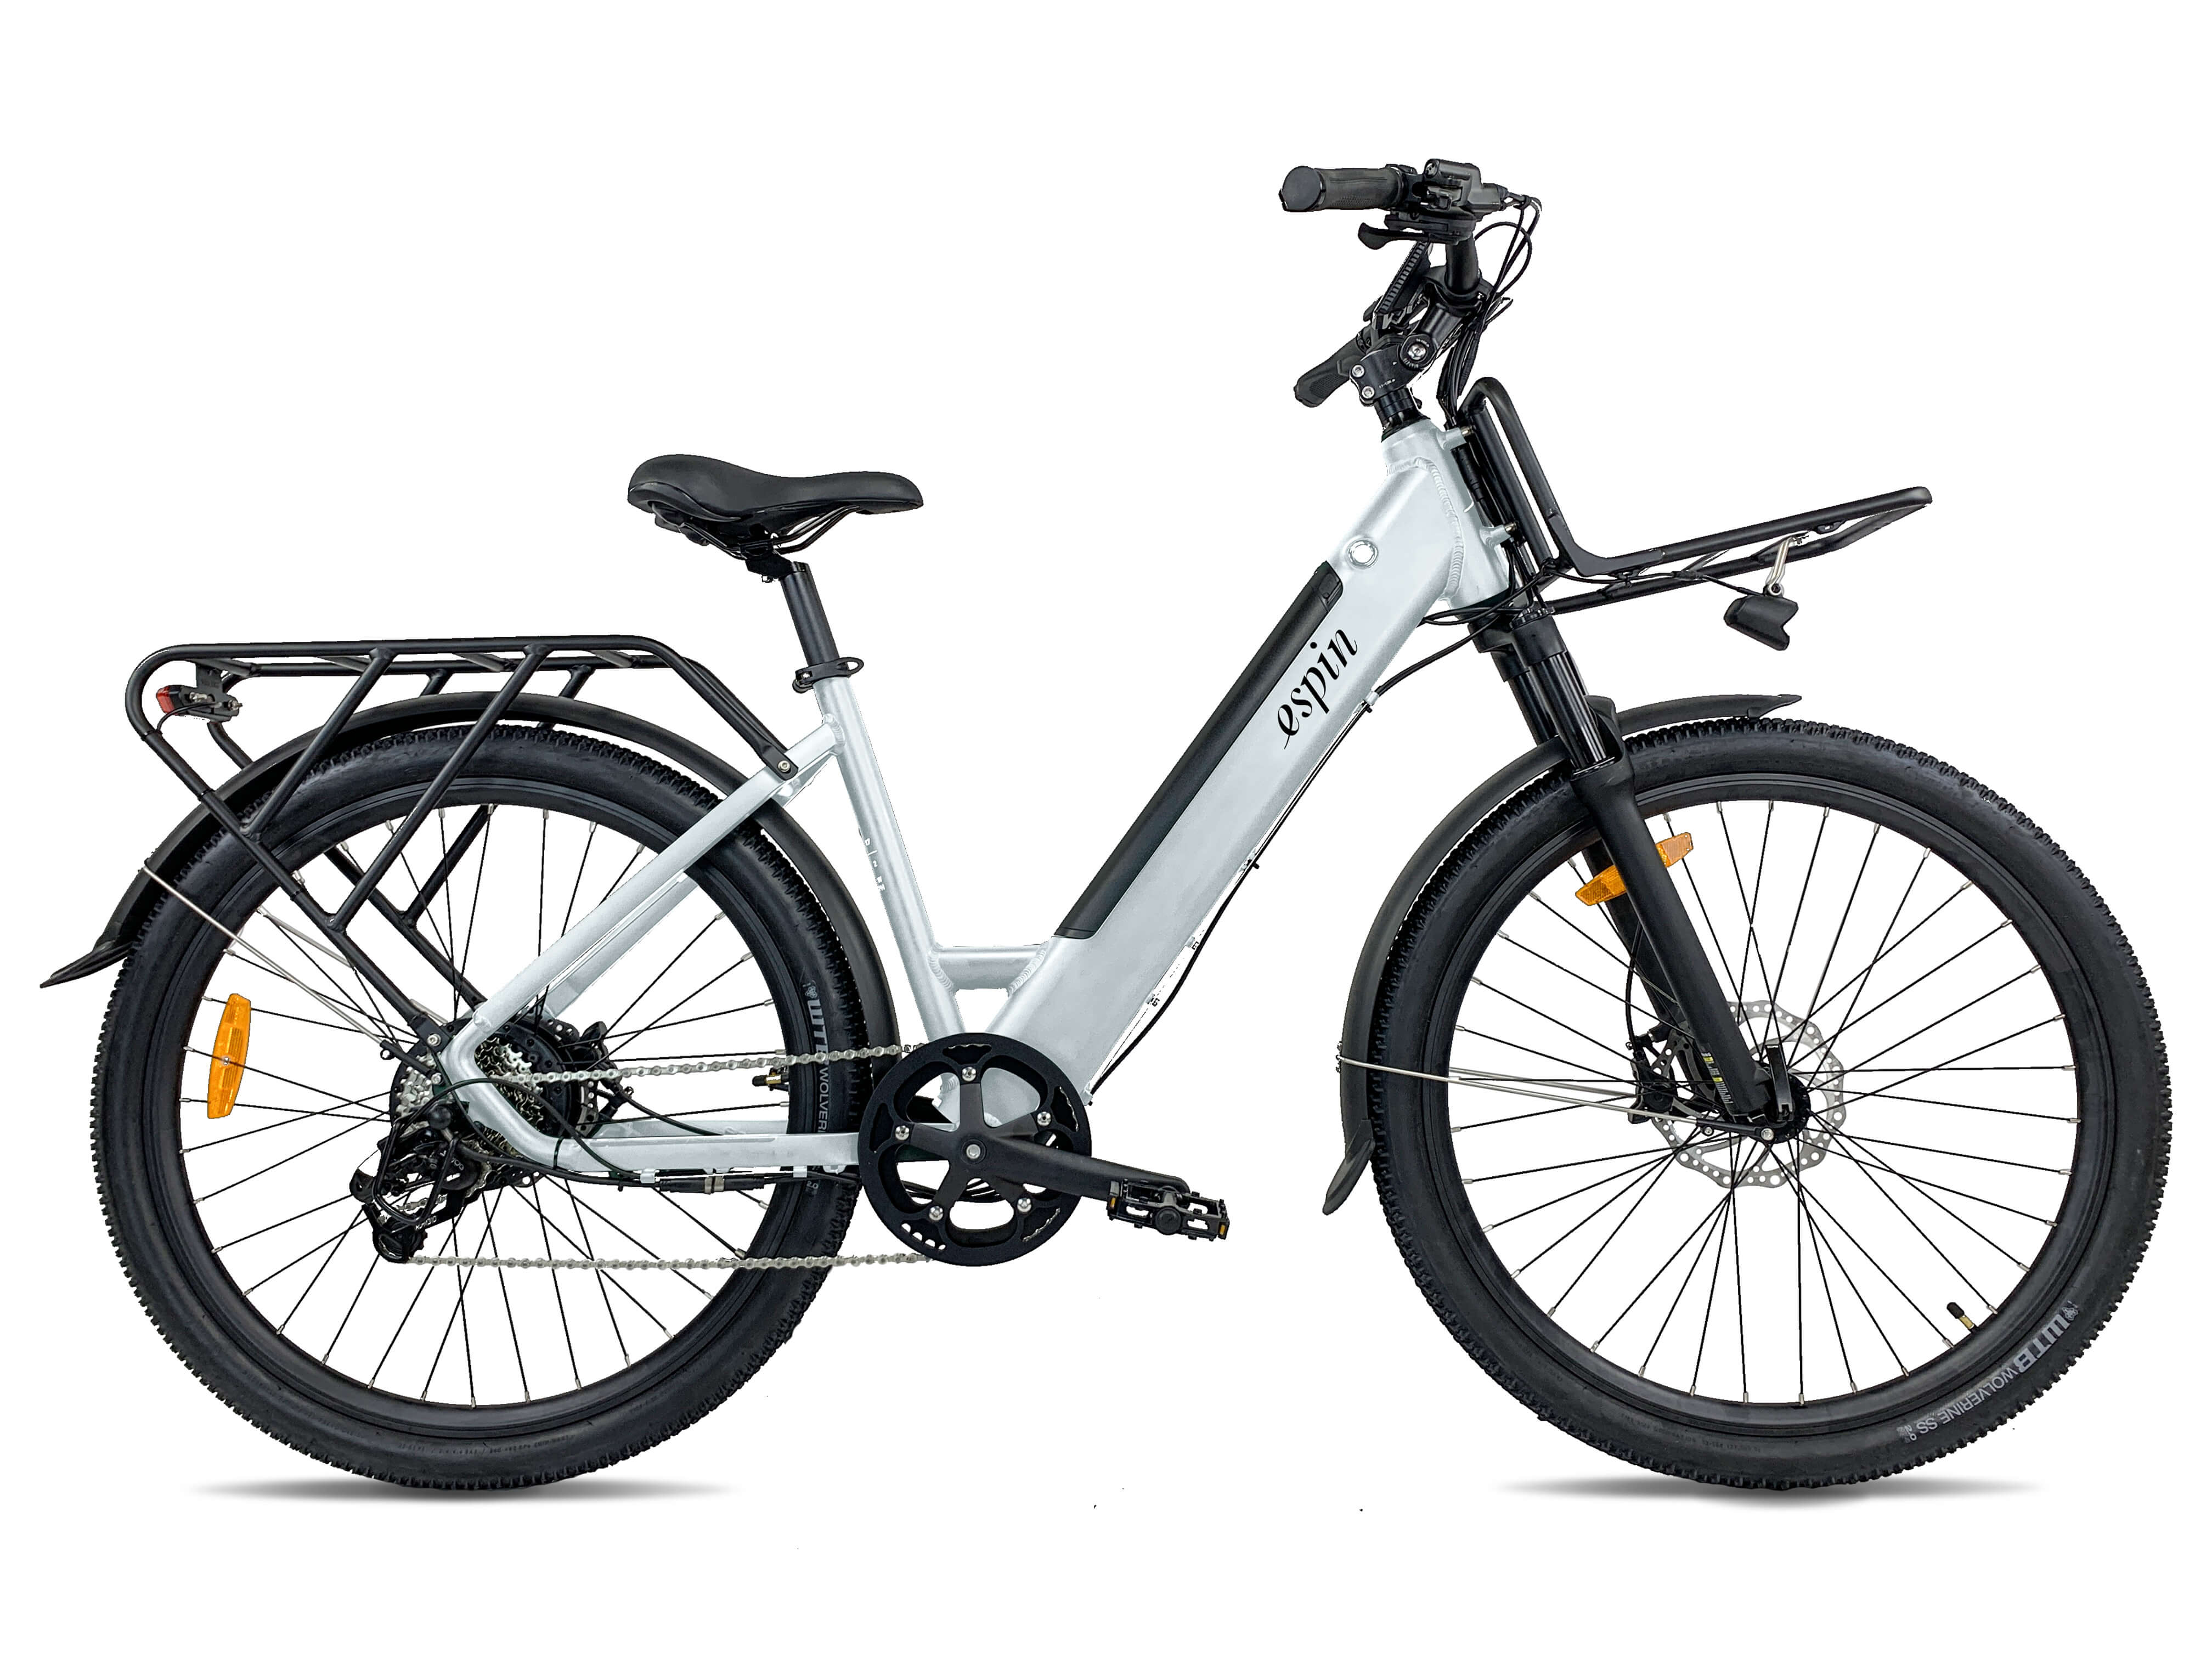 Espin Flow Folding Fat Tire Electric Bike & City Bicycle & urban commuter & cruise bikes for zipping from city streets to train to work